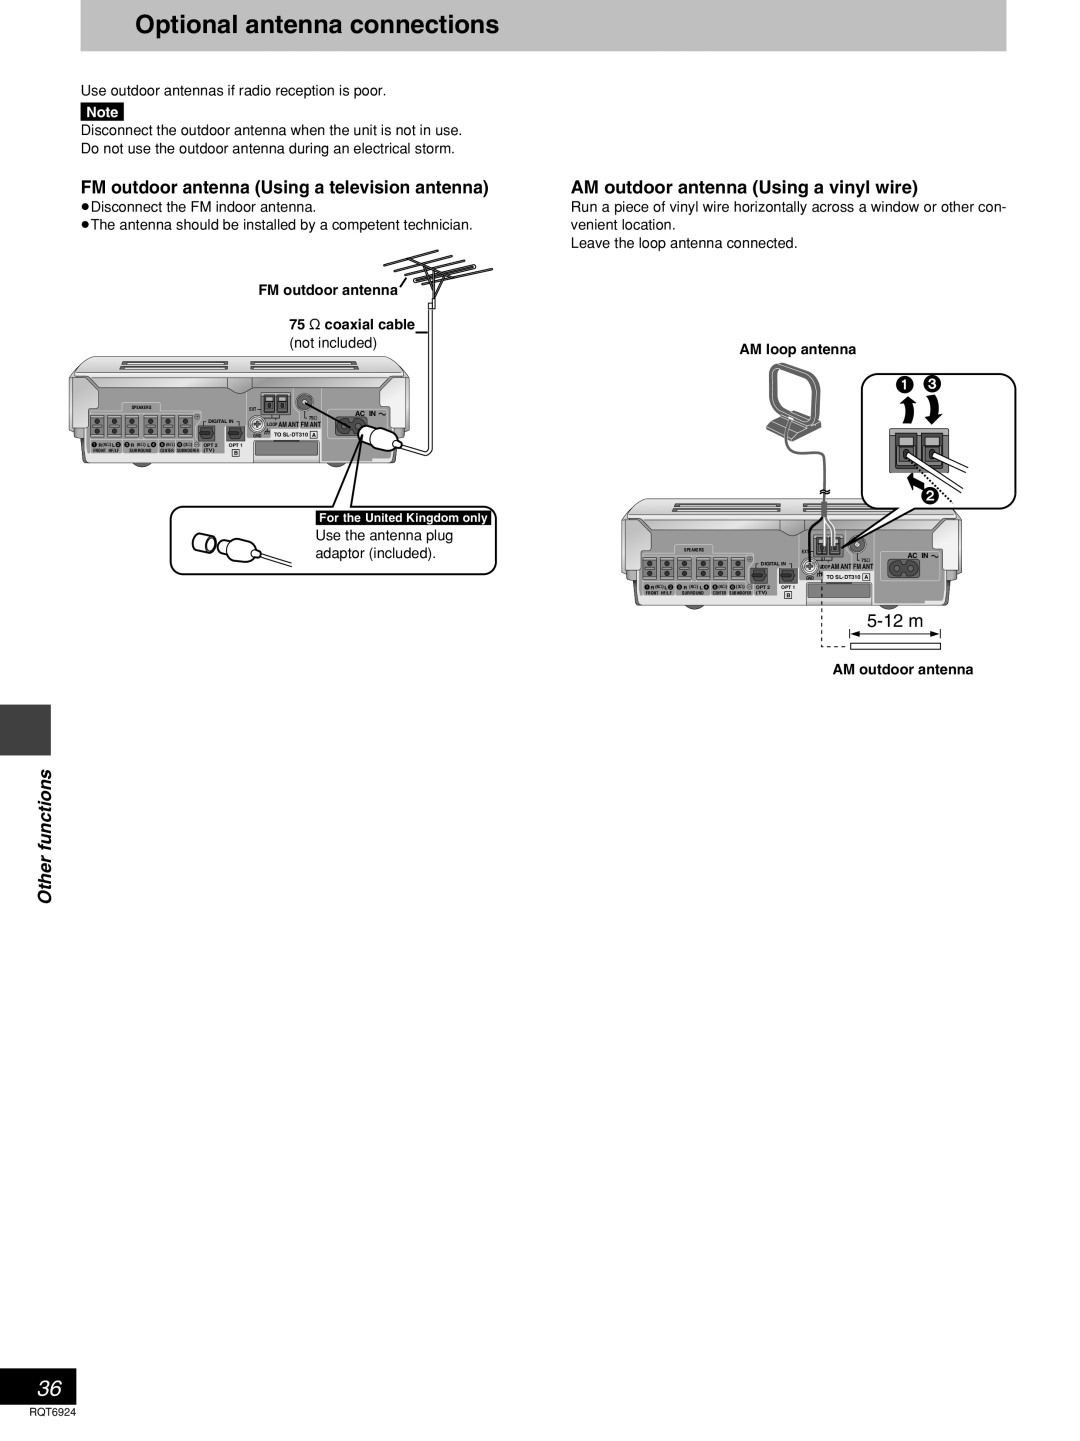 Panasonic SC-DT310 manual Optional antenna connections, FM outdoor antenna Using a television antenna, Other functions 